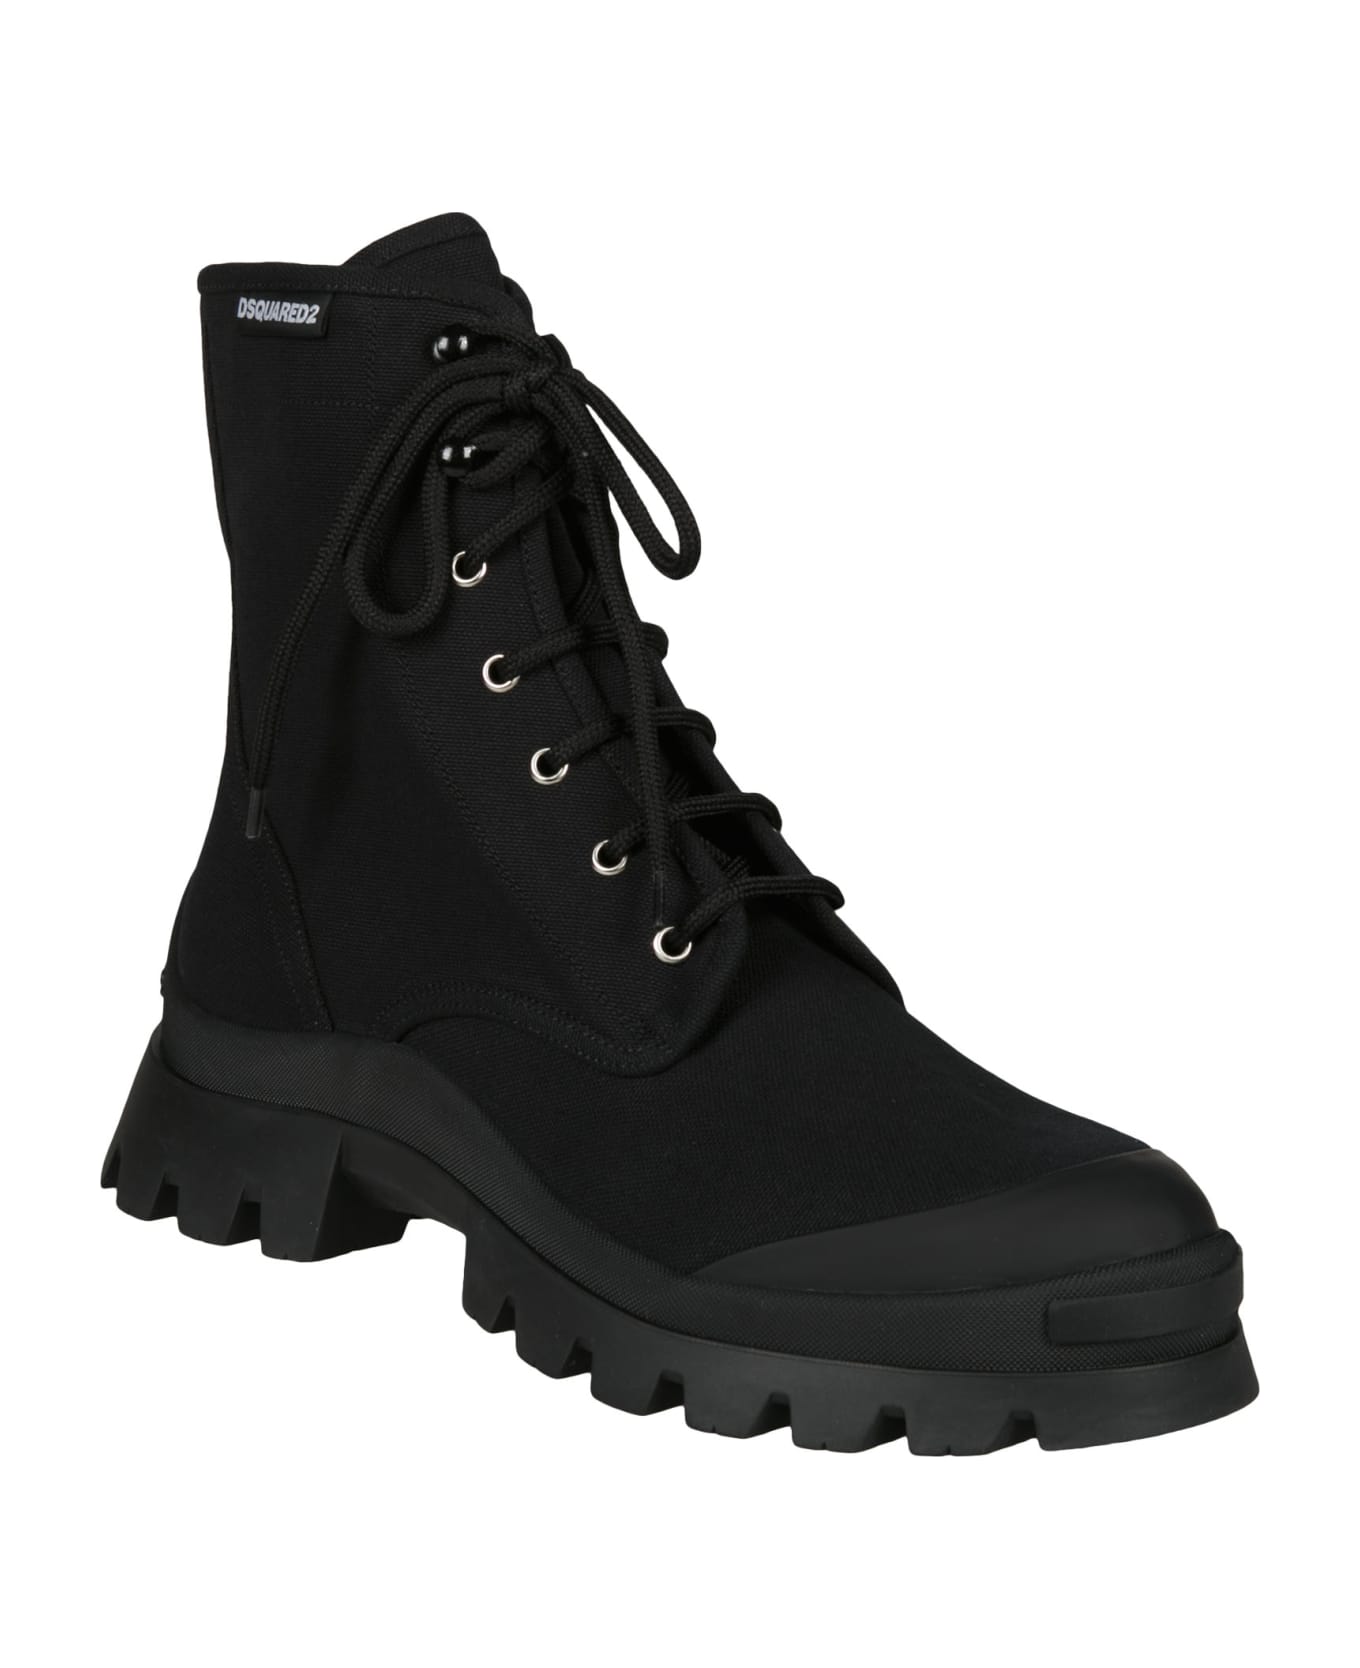 Dsquared2 Logo Lace-up Boots - Black